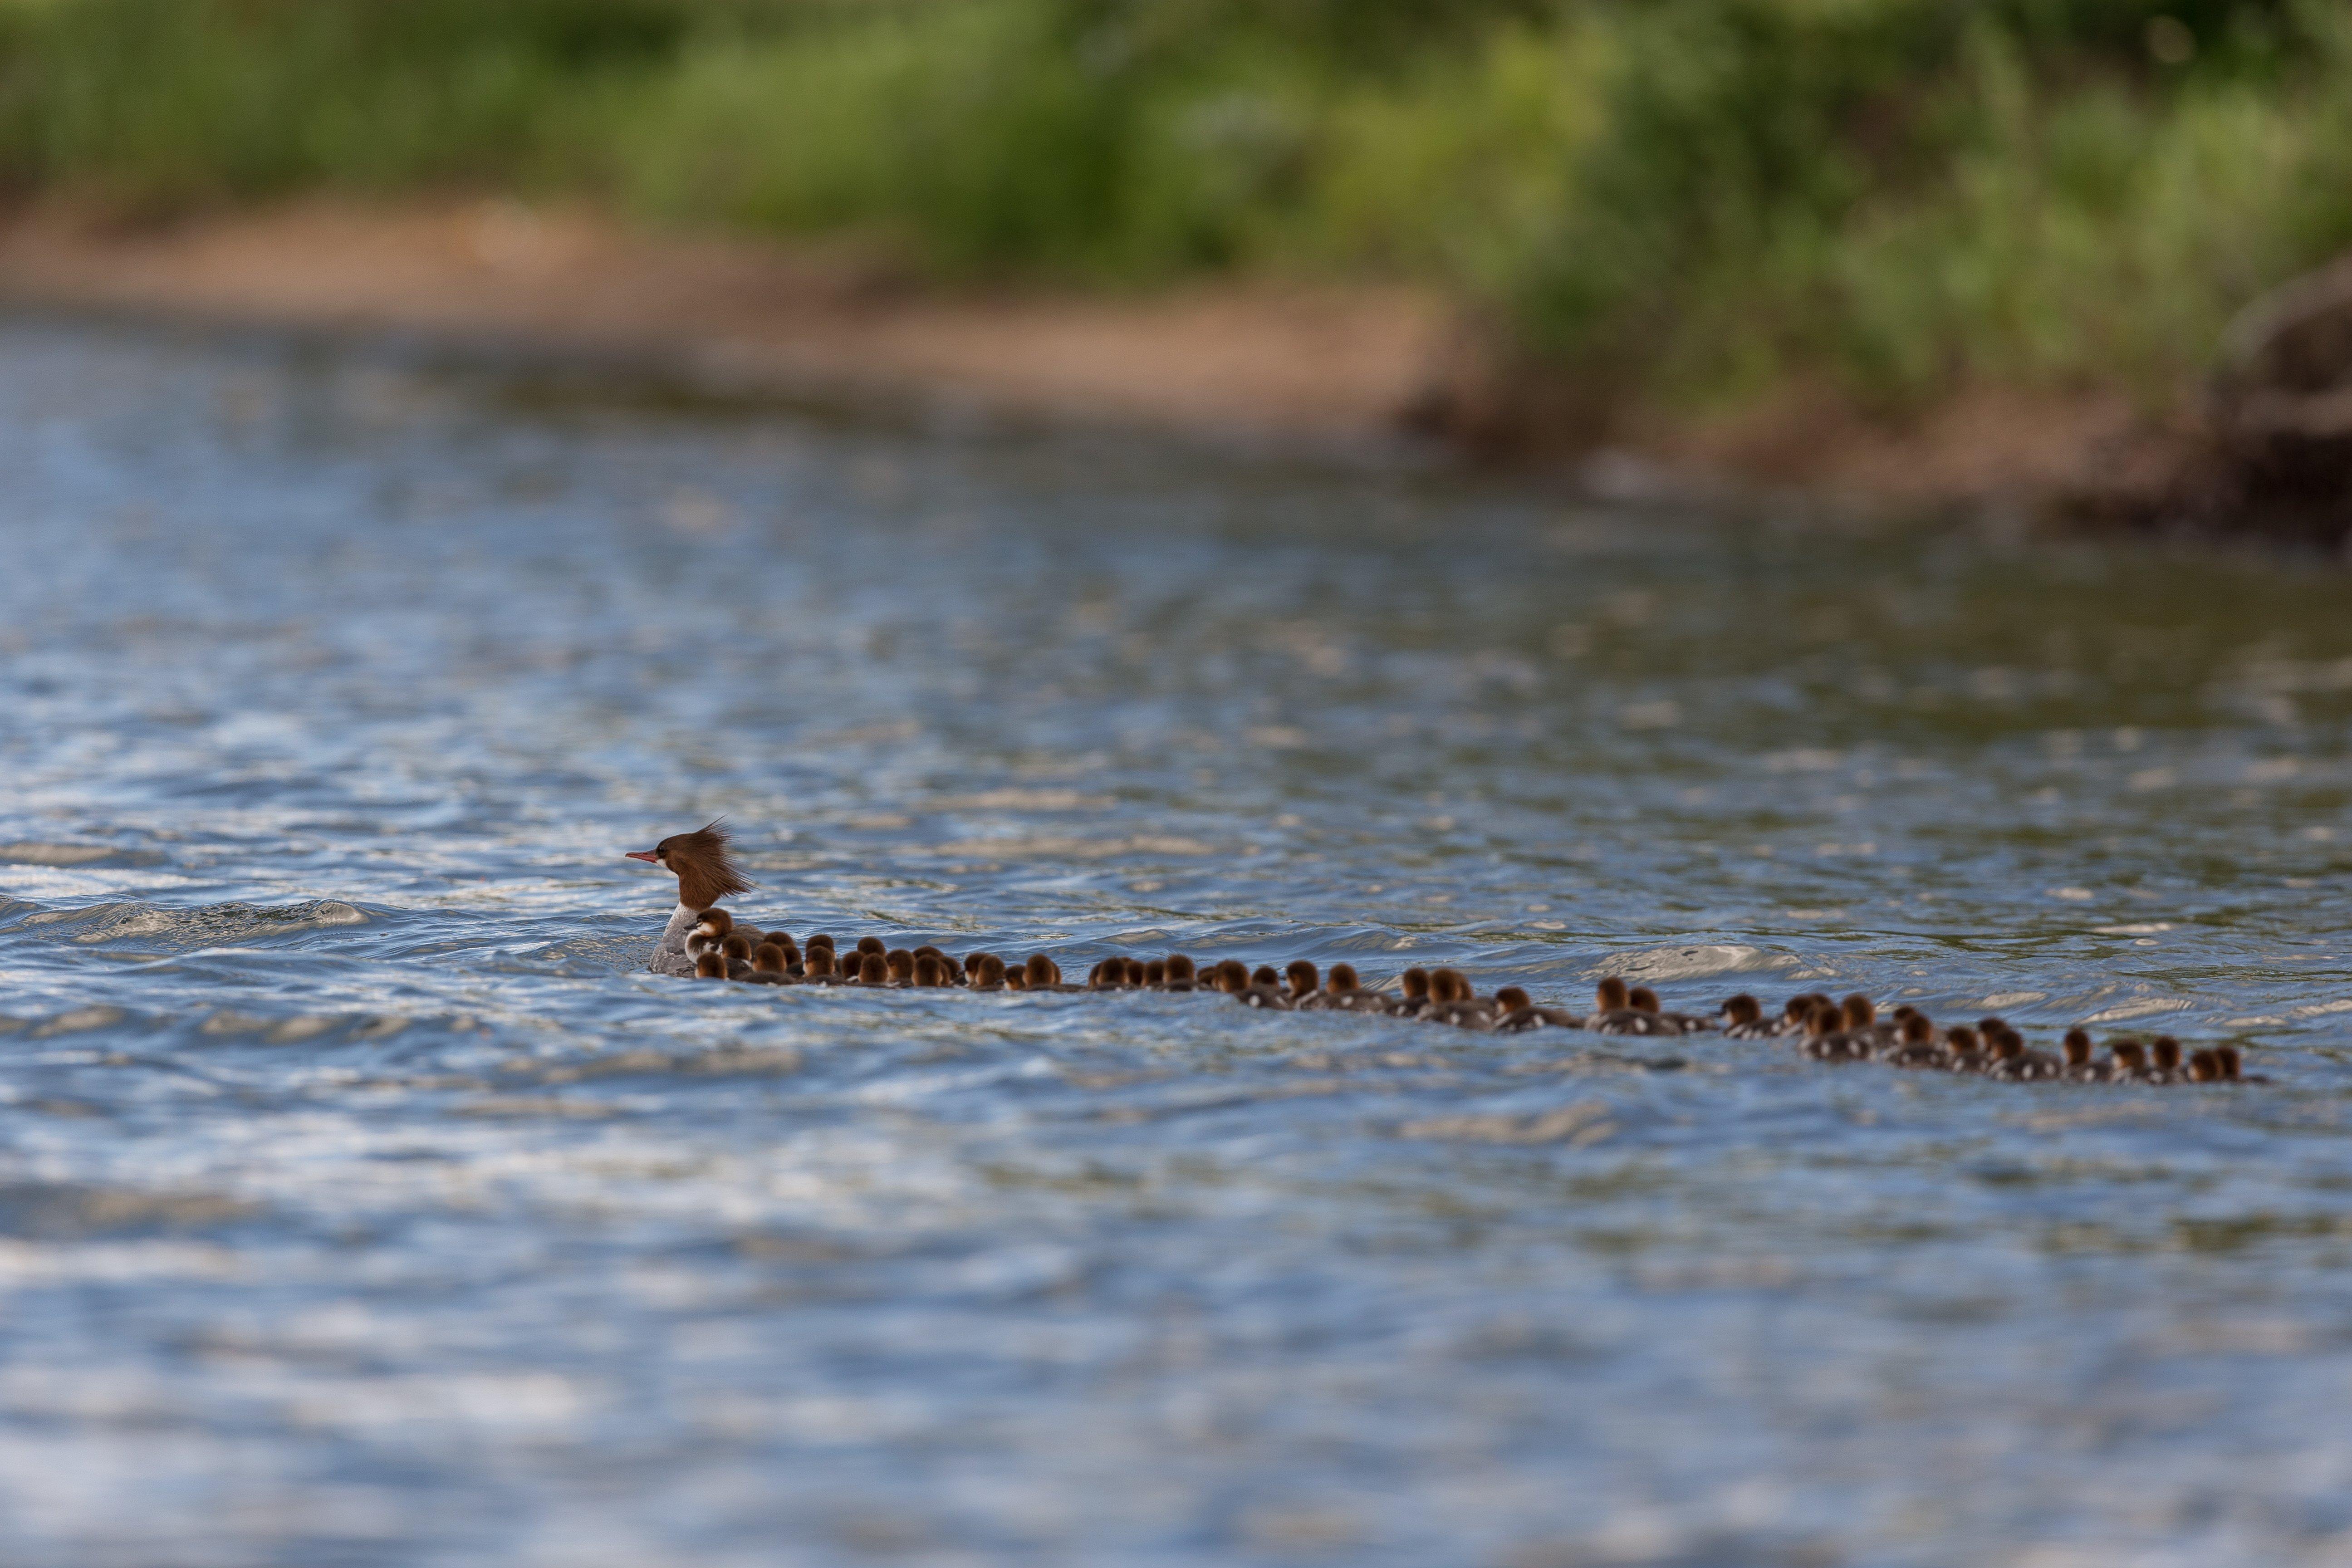 In this photo, which has received worldwide attention, Mama Merganser leads her extended brood across Lake Bemidji. Photo © Brent Cizek